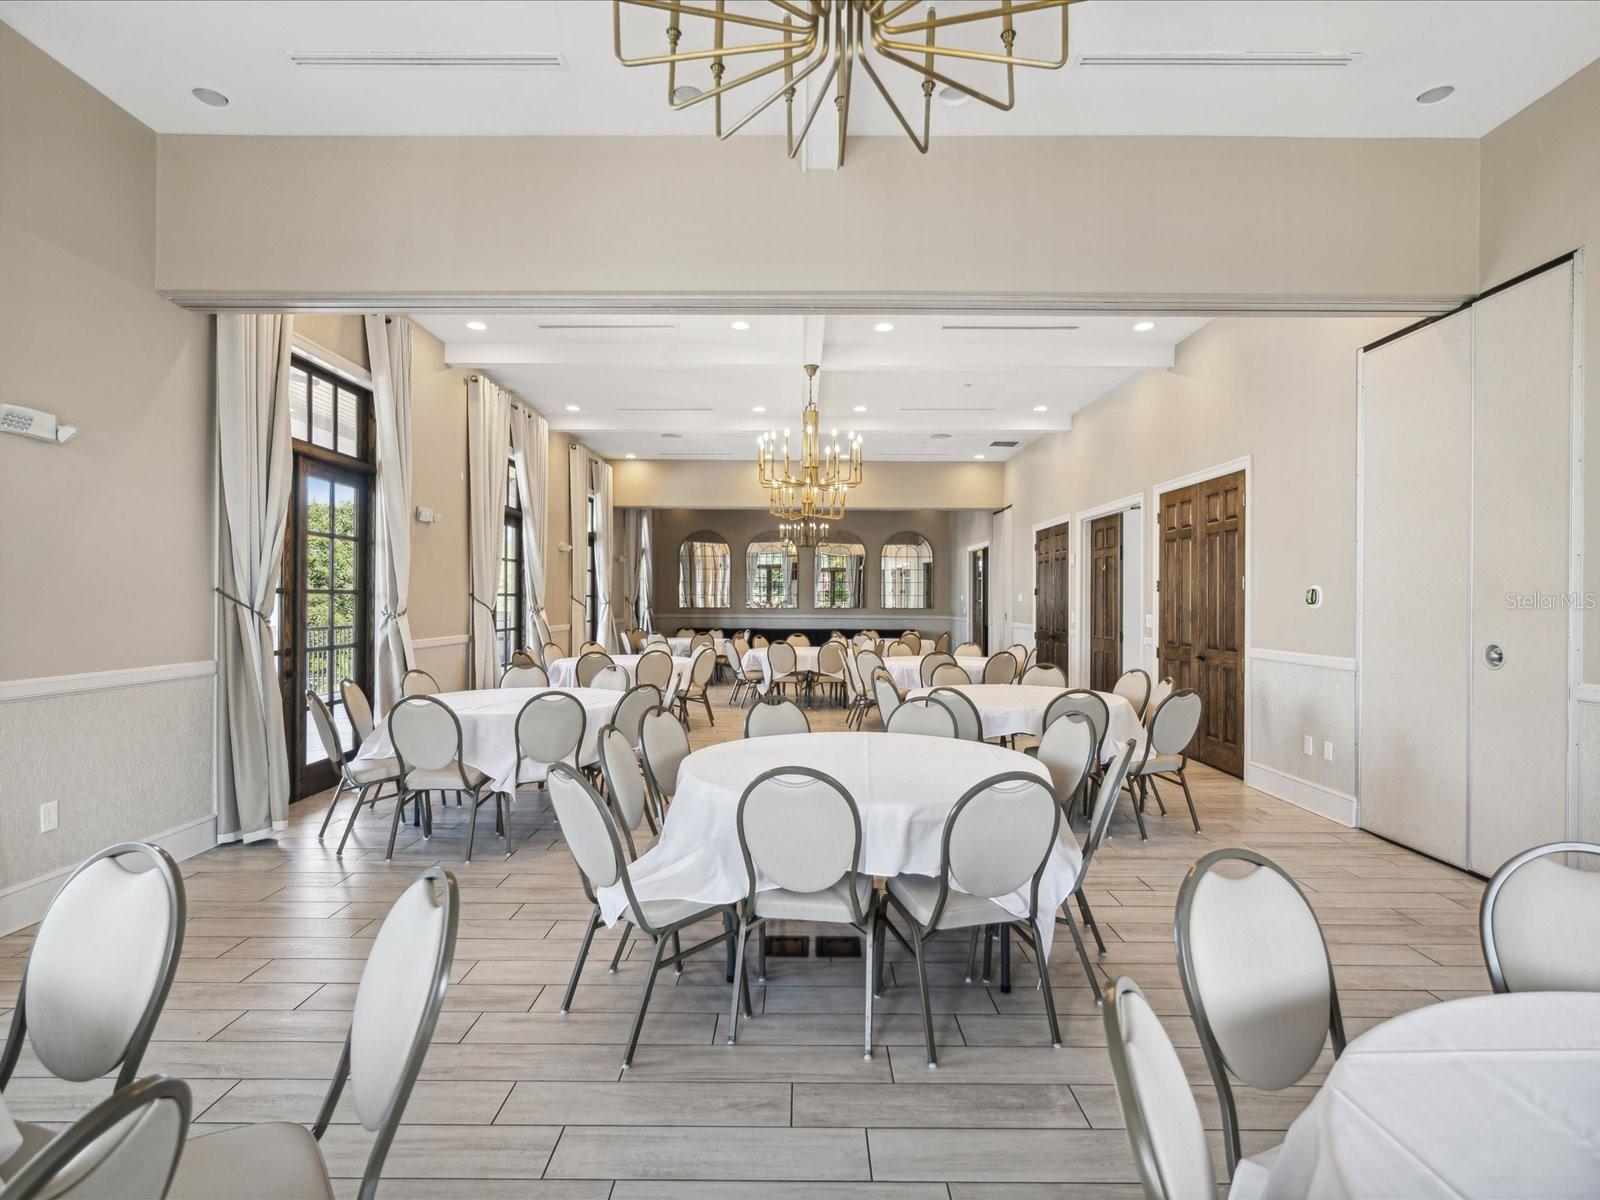 The second floor of the clubhouse is where the CDD meetings take place and is available for rent for a small fee for parties, wedding receptions, and community events. Outside catering is allowed.